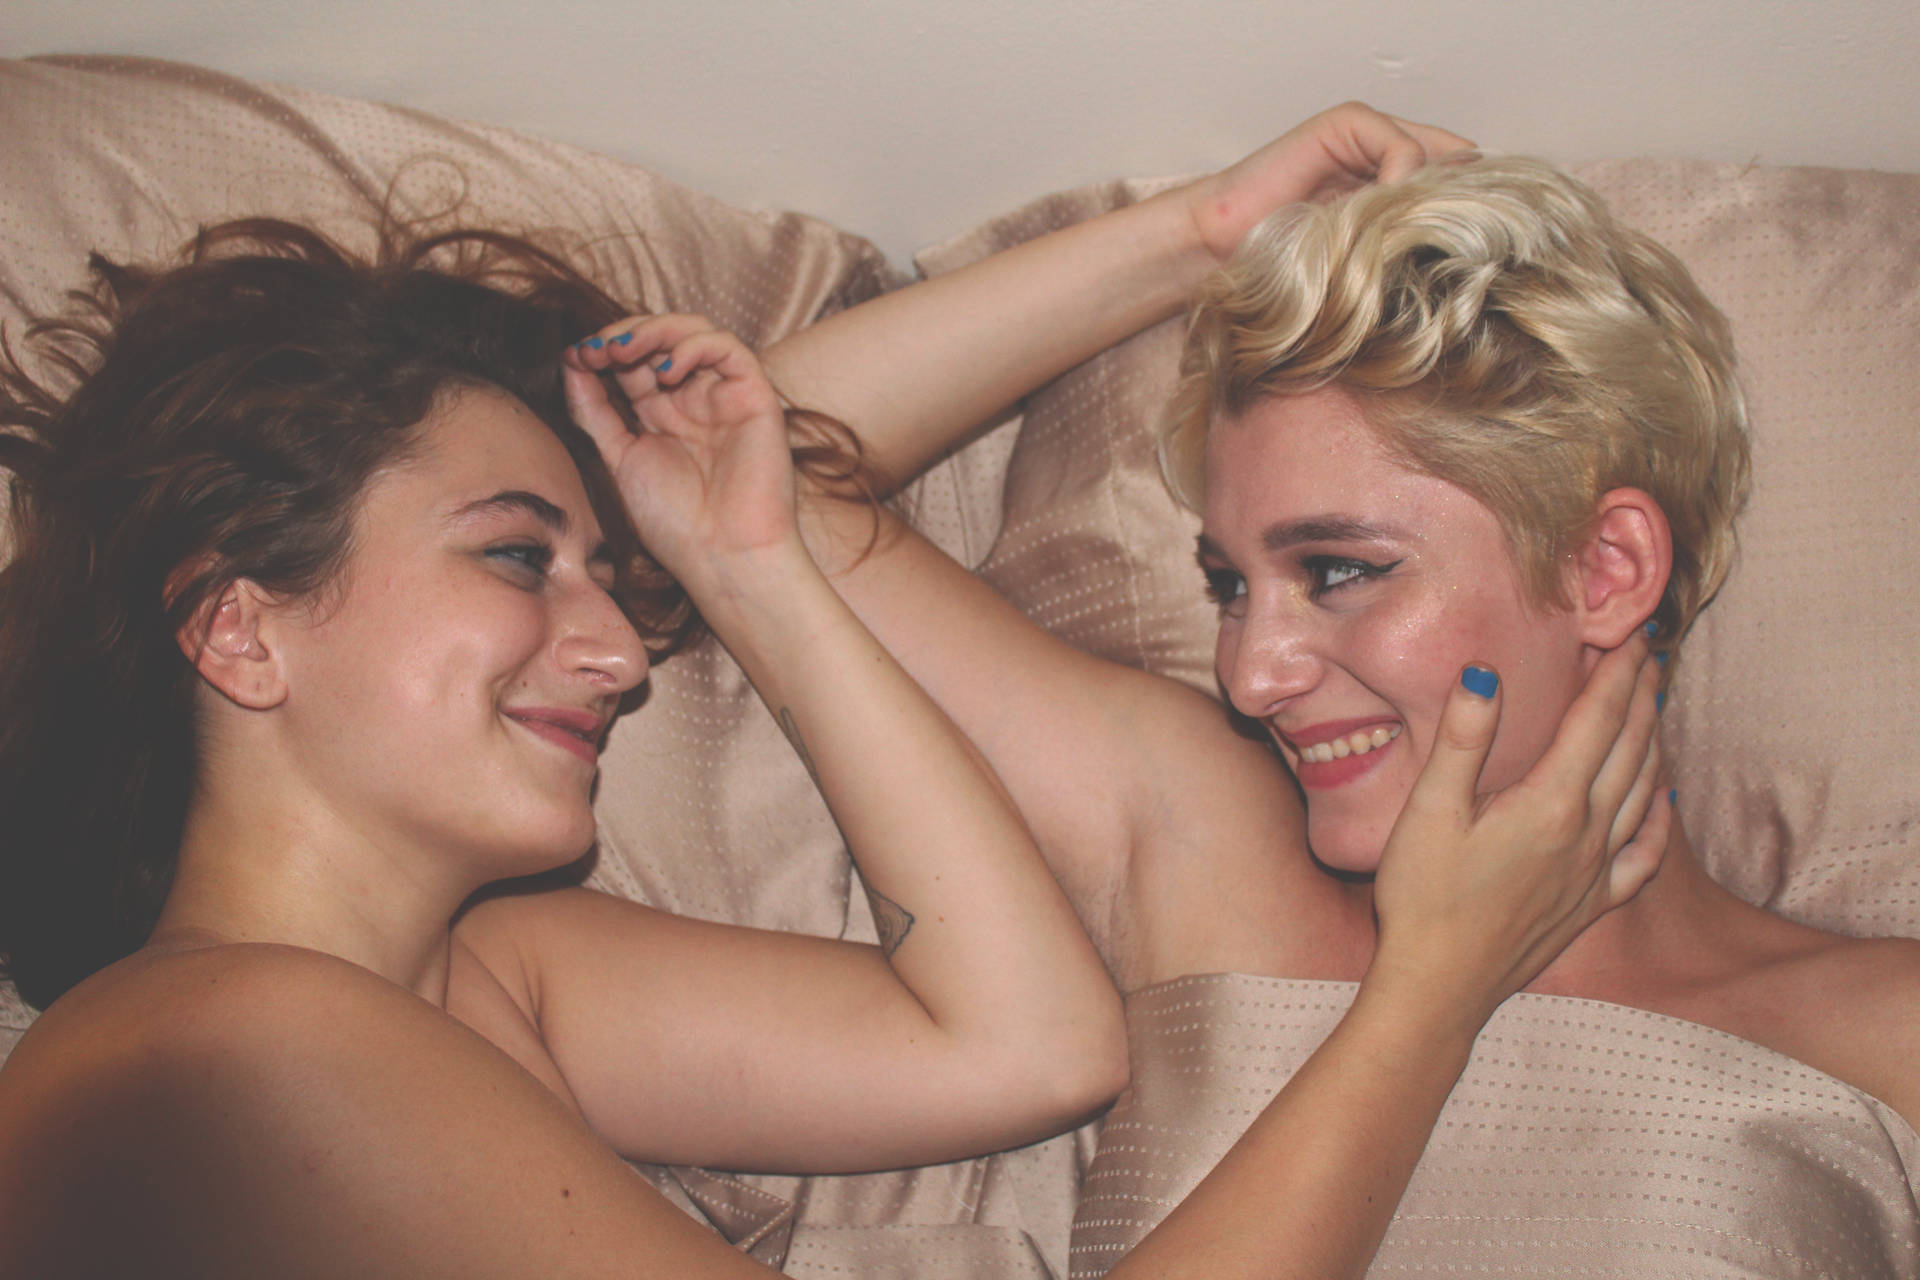 Lesbian Couple On Bed Background